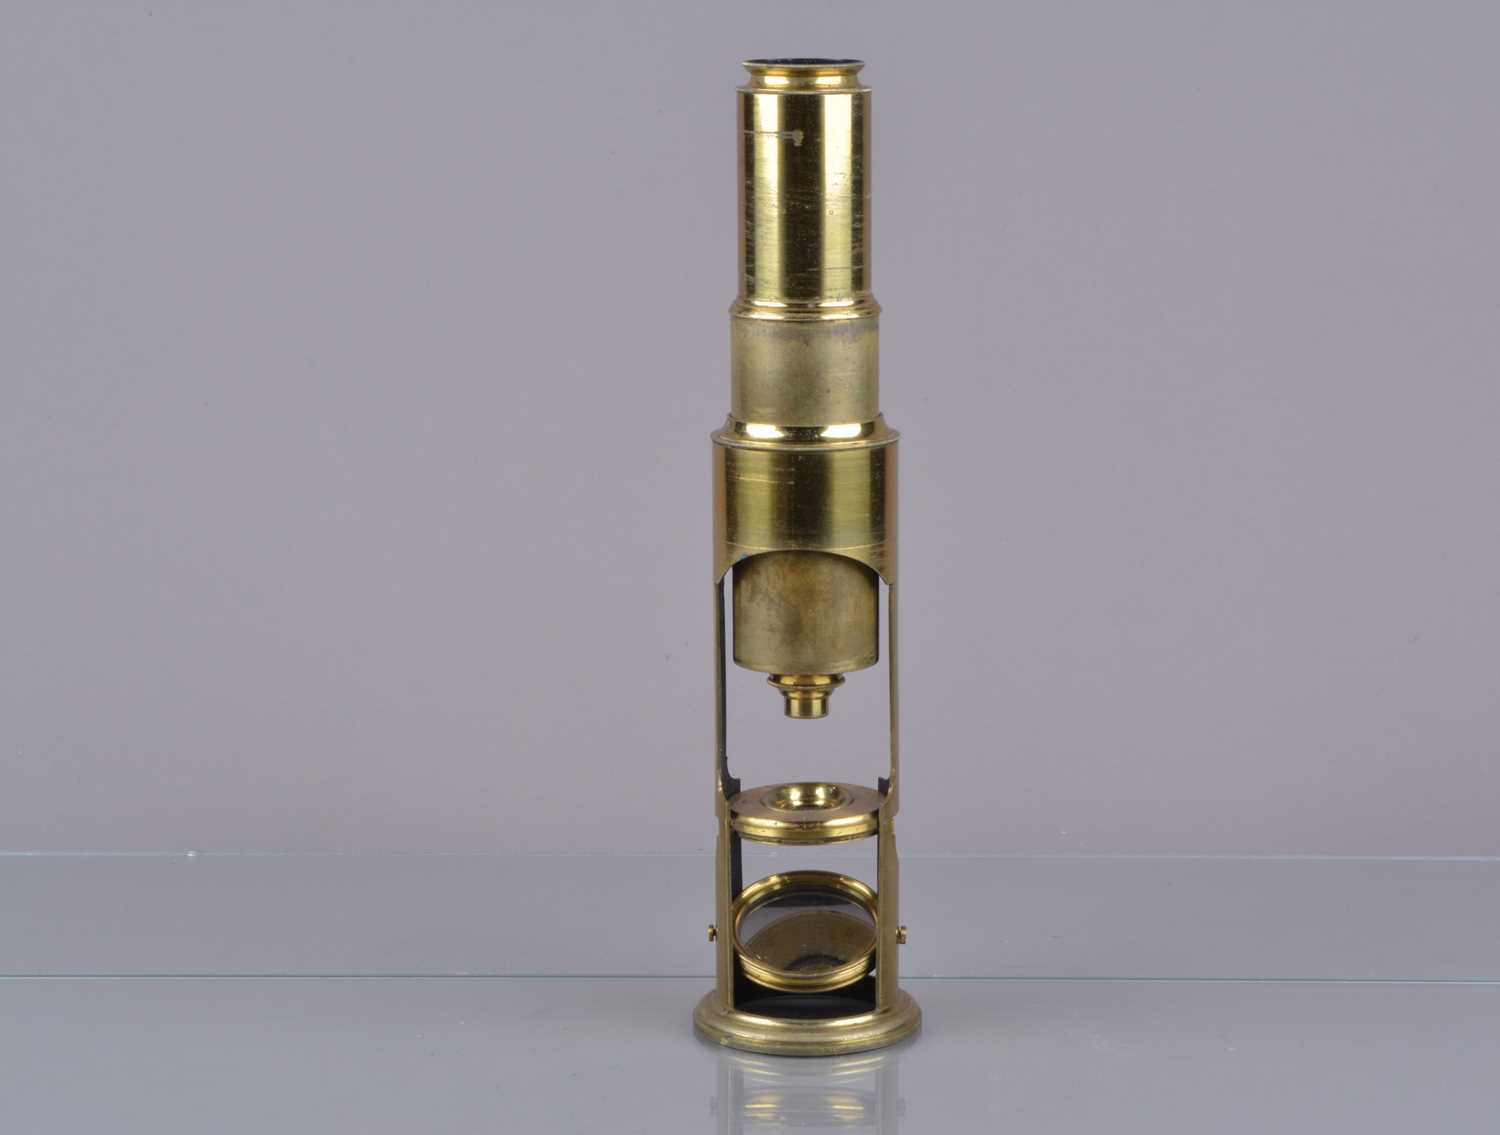 Lot 10 - An mid-19th Century lacquered brass Compound Monocular Drum Microscope